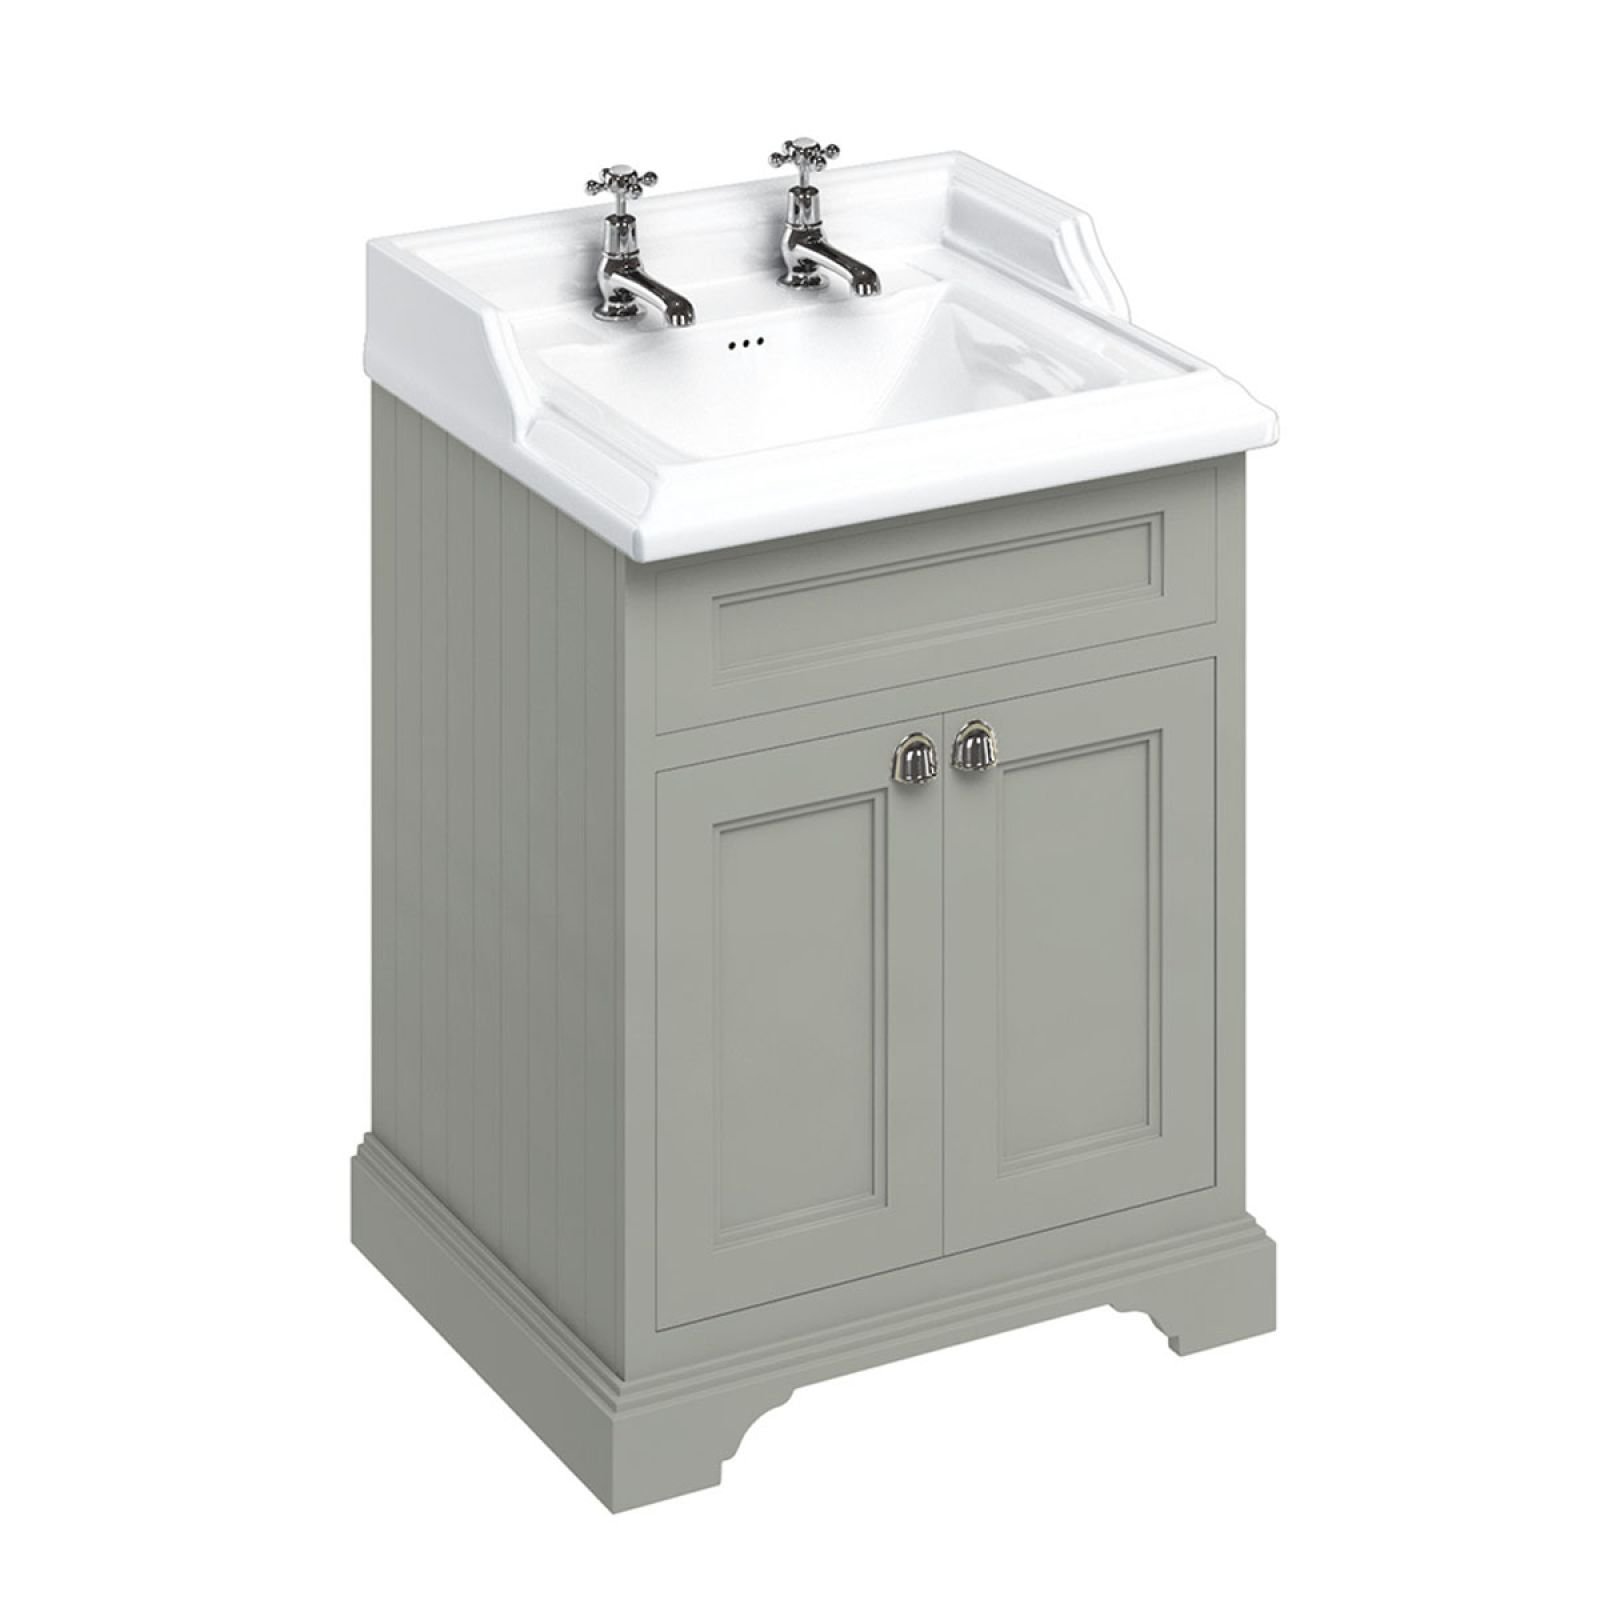 Freestanding 65cm wide Vanity Unit with double doors and classic basin